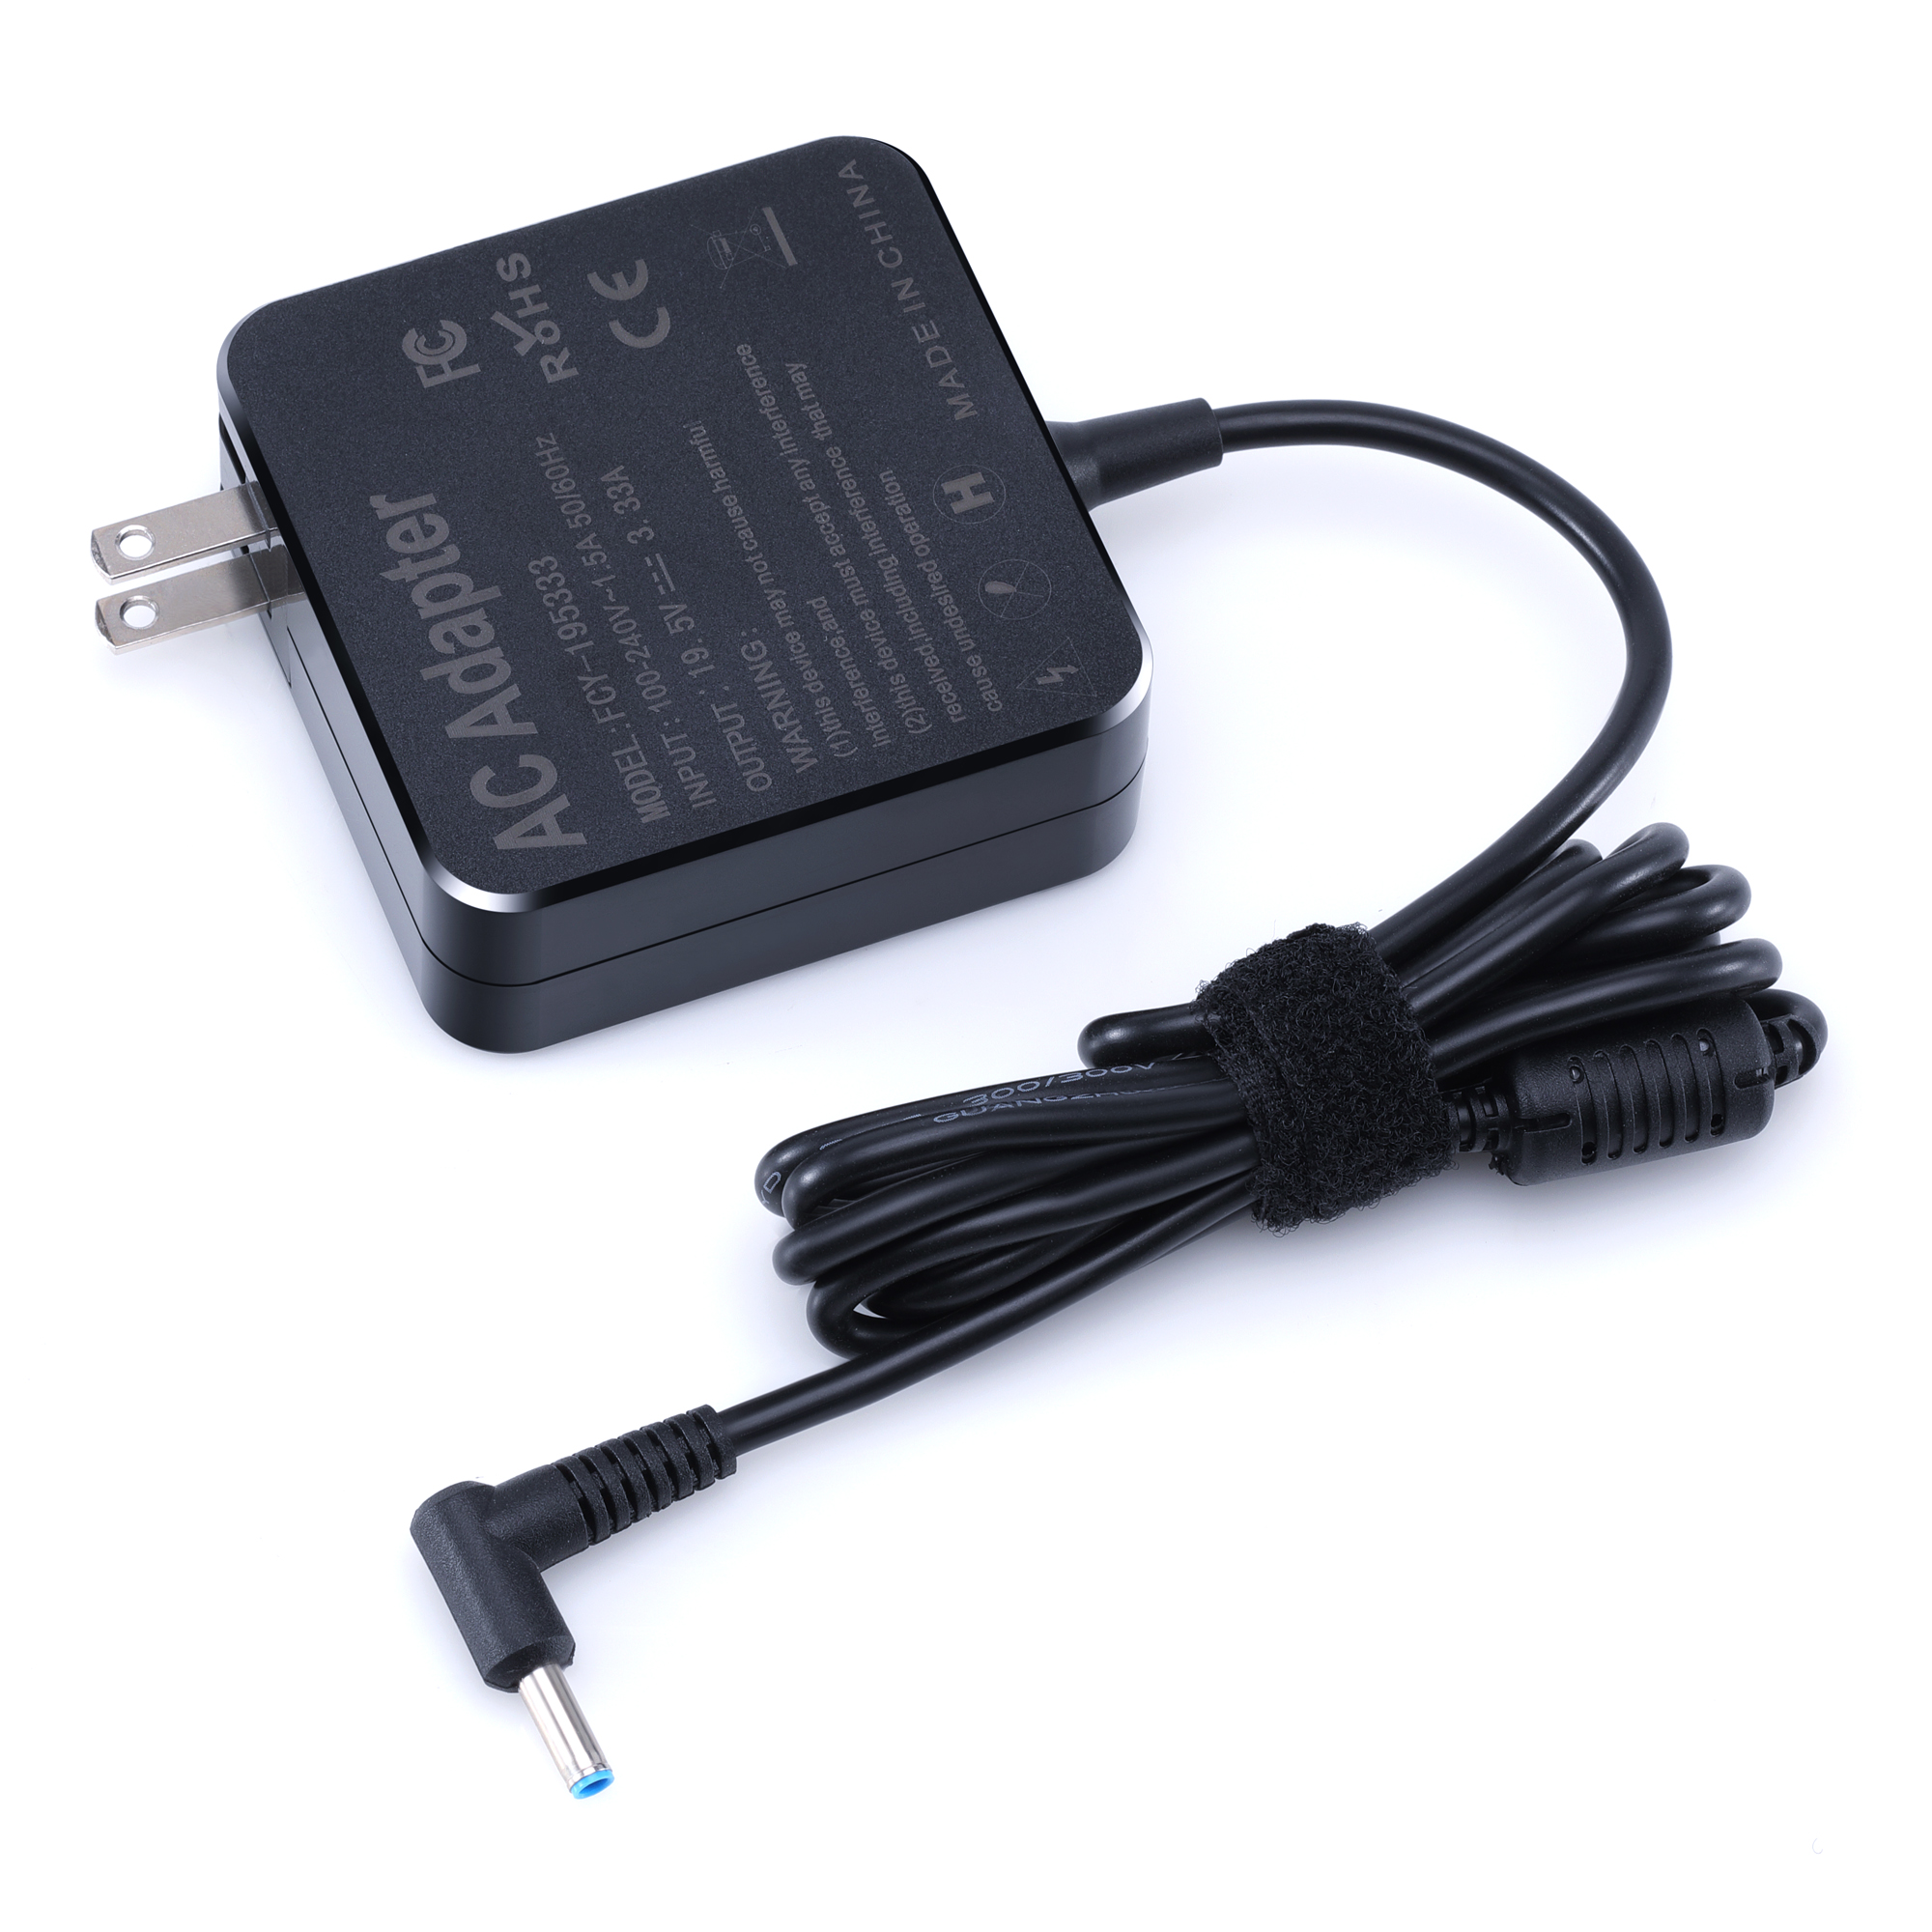 Fothwin-195V-333A-65W-Interface-45times30mm-Laptop-AC-Power-Adapter-Notebook-Charger-For-HP-1454514-1